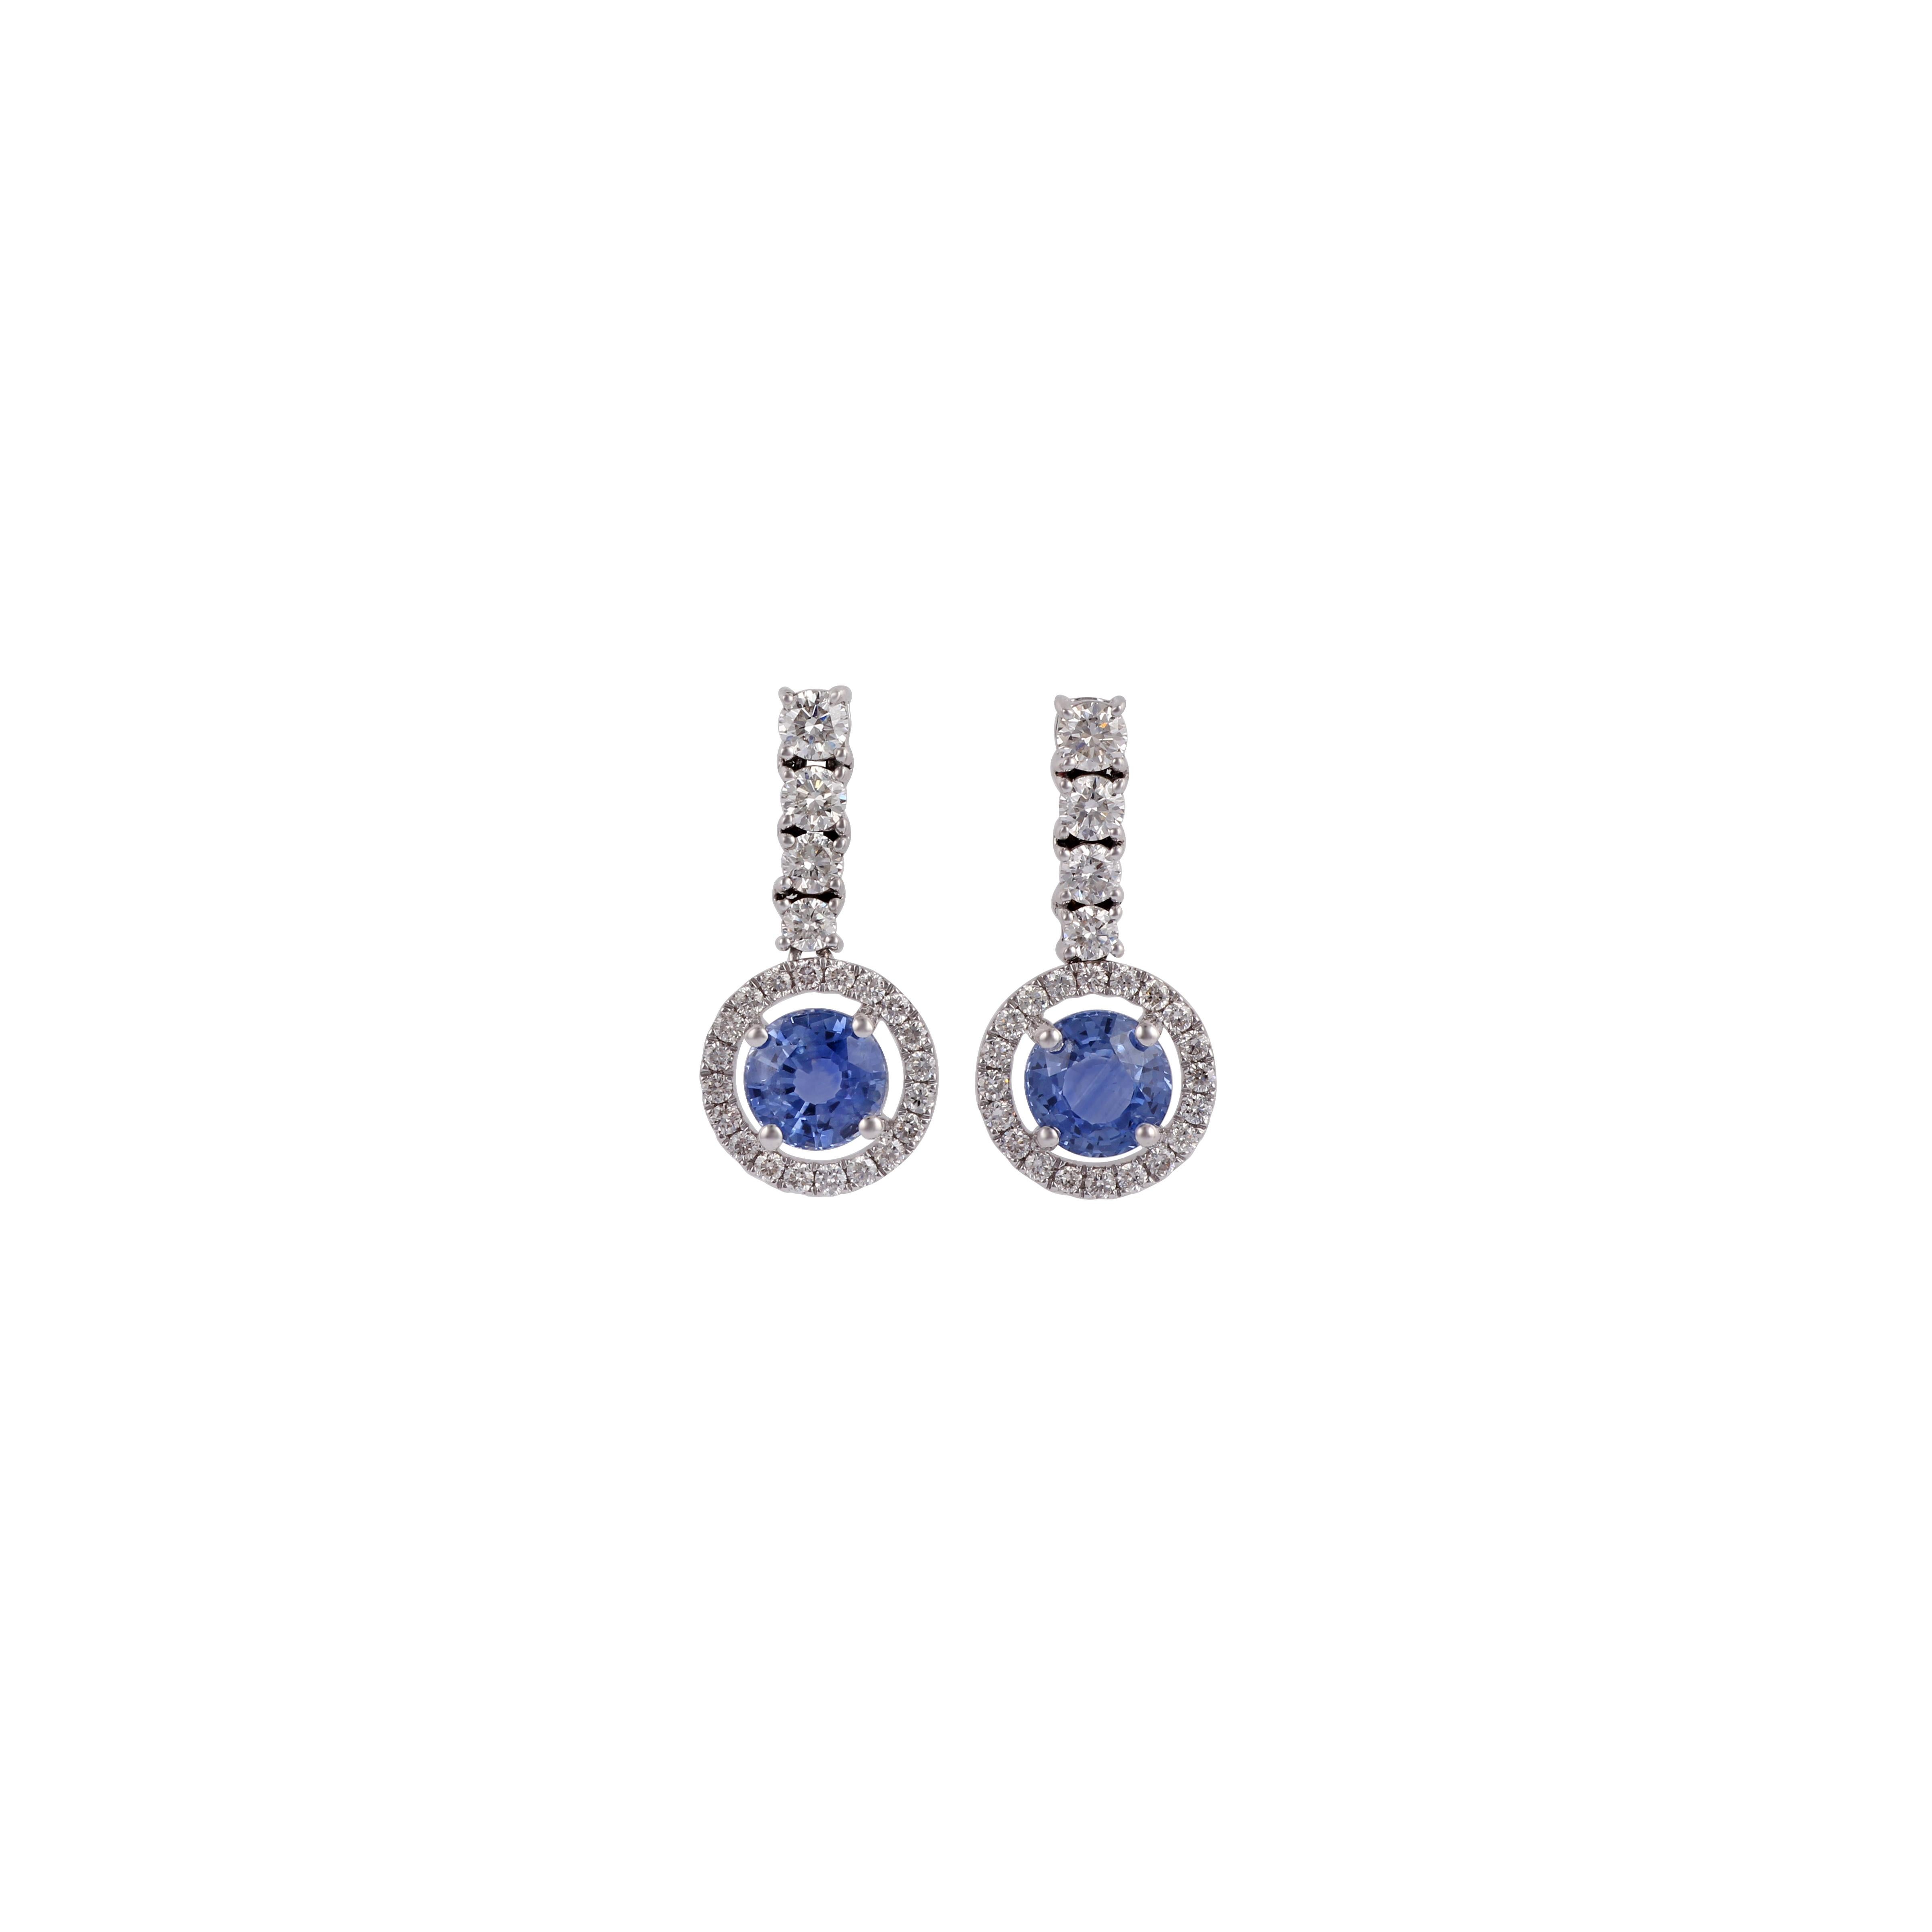 Round Cut 1.96  Carat Blue Sapphire & Diamond Earrings Studs in 18k White Gold . For Sale